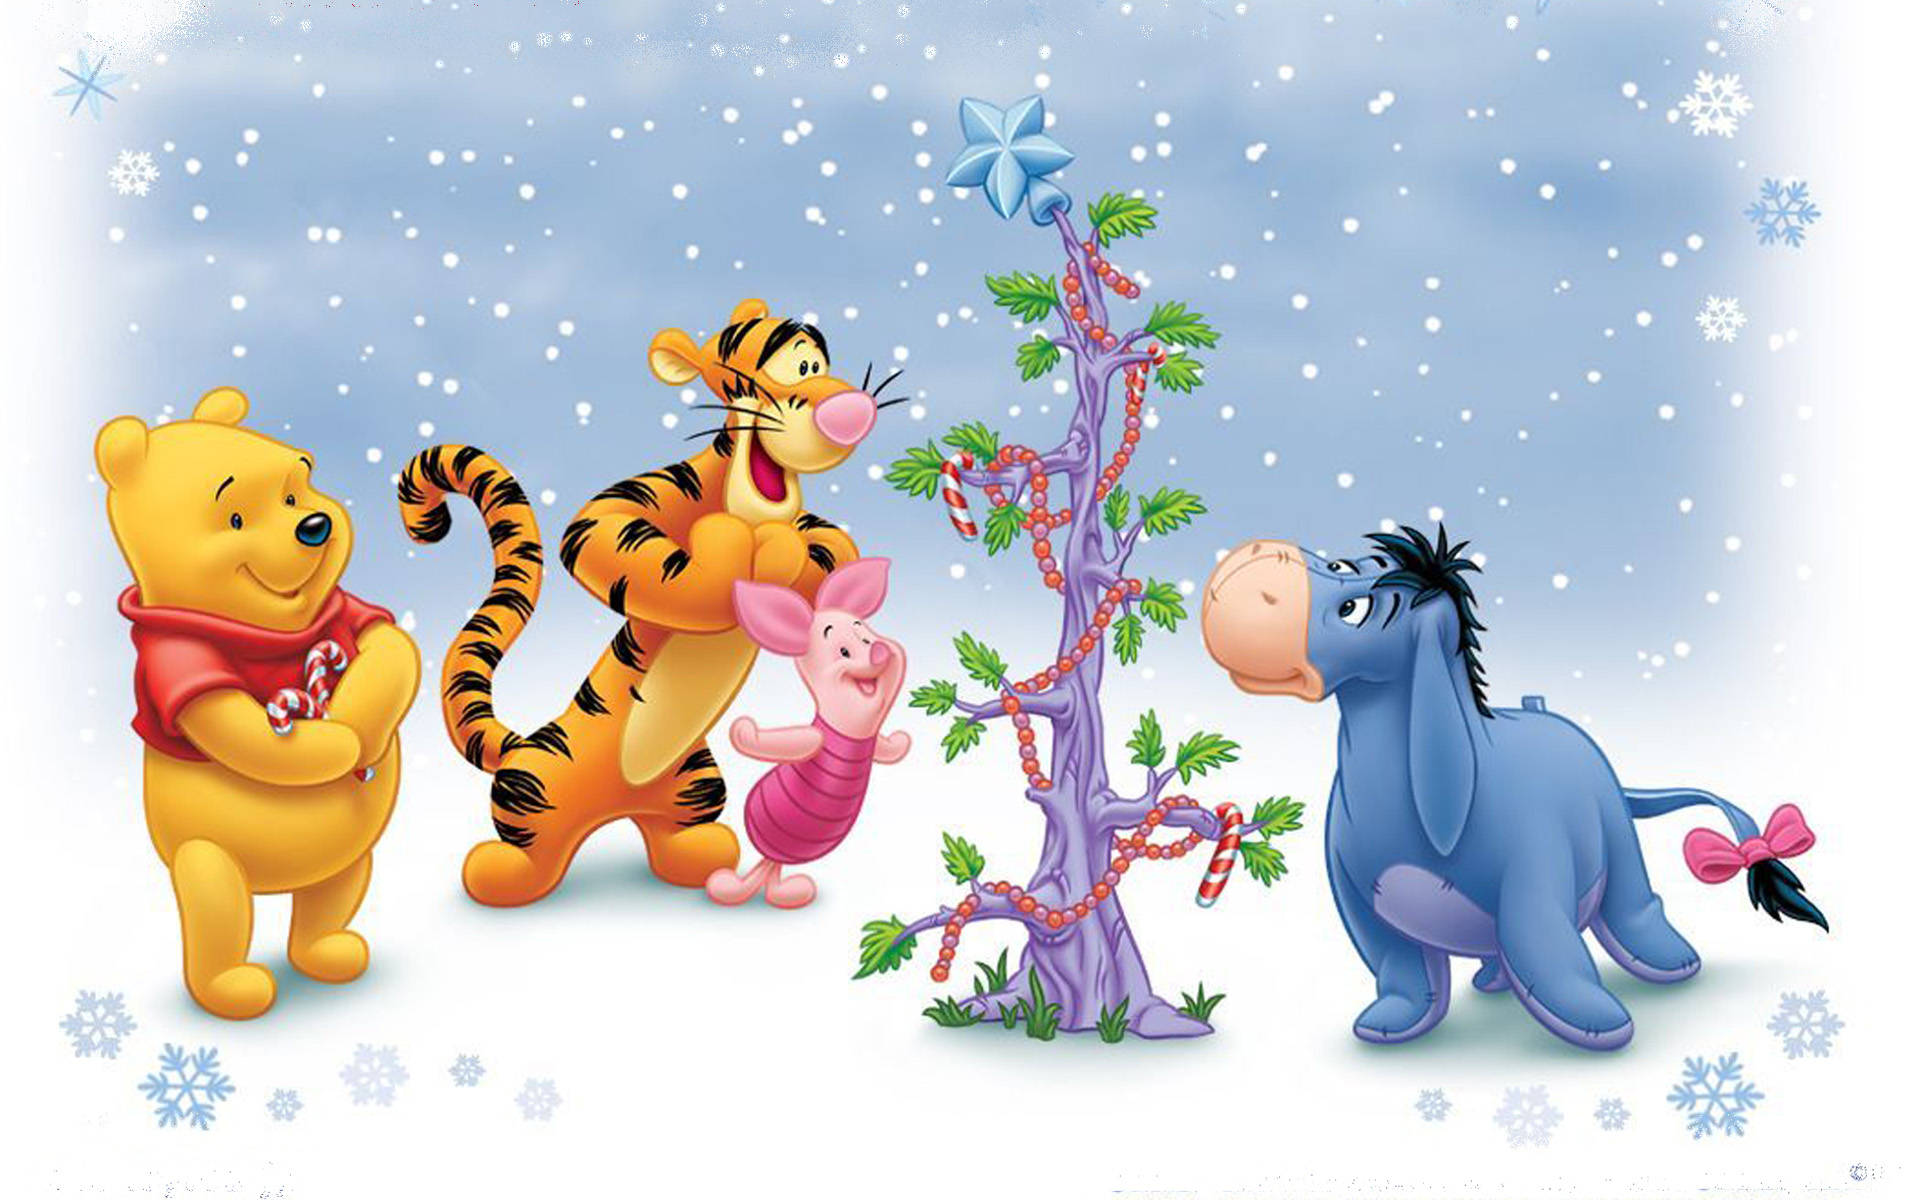 Celebrate Christmas with Winnie the Pooh and Friends Wallpaper